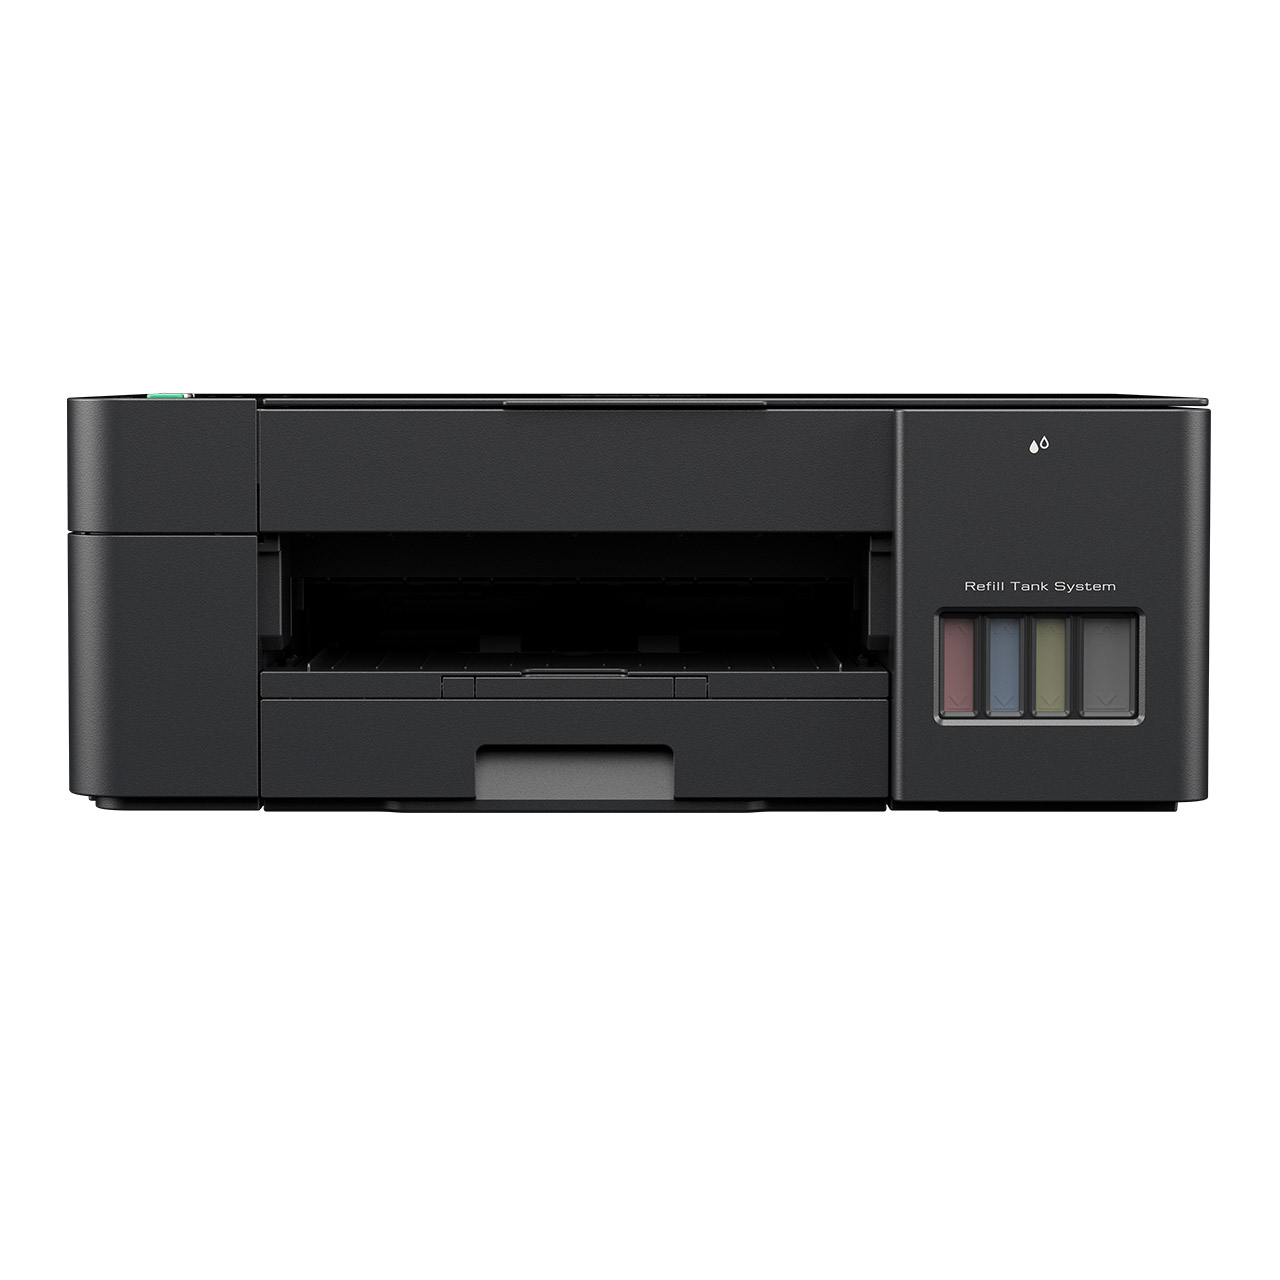 Brother DCP-T420W multifunctional Inkjet A4 6000 x 1200 DPI 16 ppm Wi-Fi - Tintenstrahldruck - 16 ppm